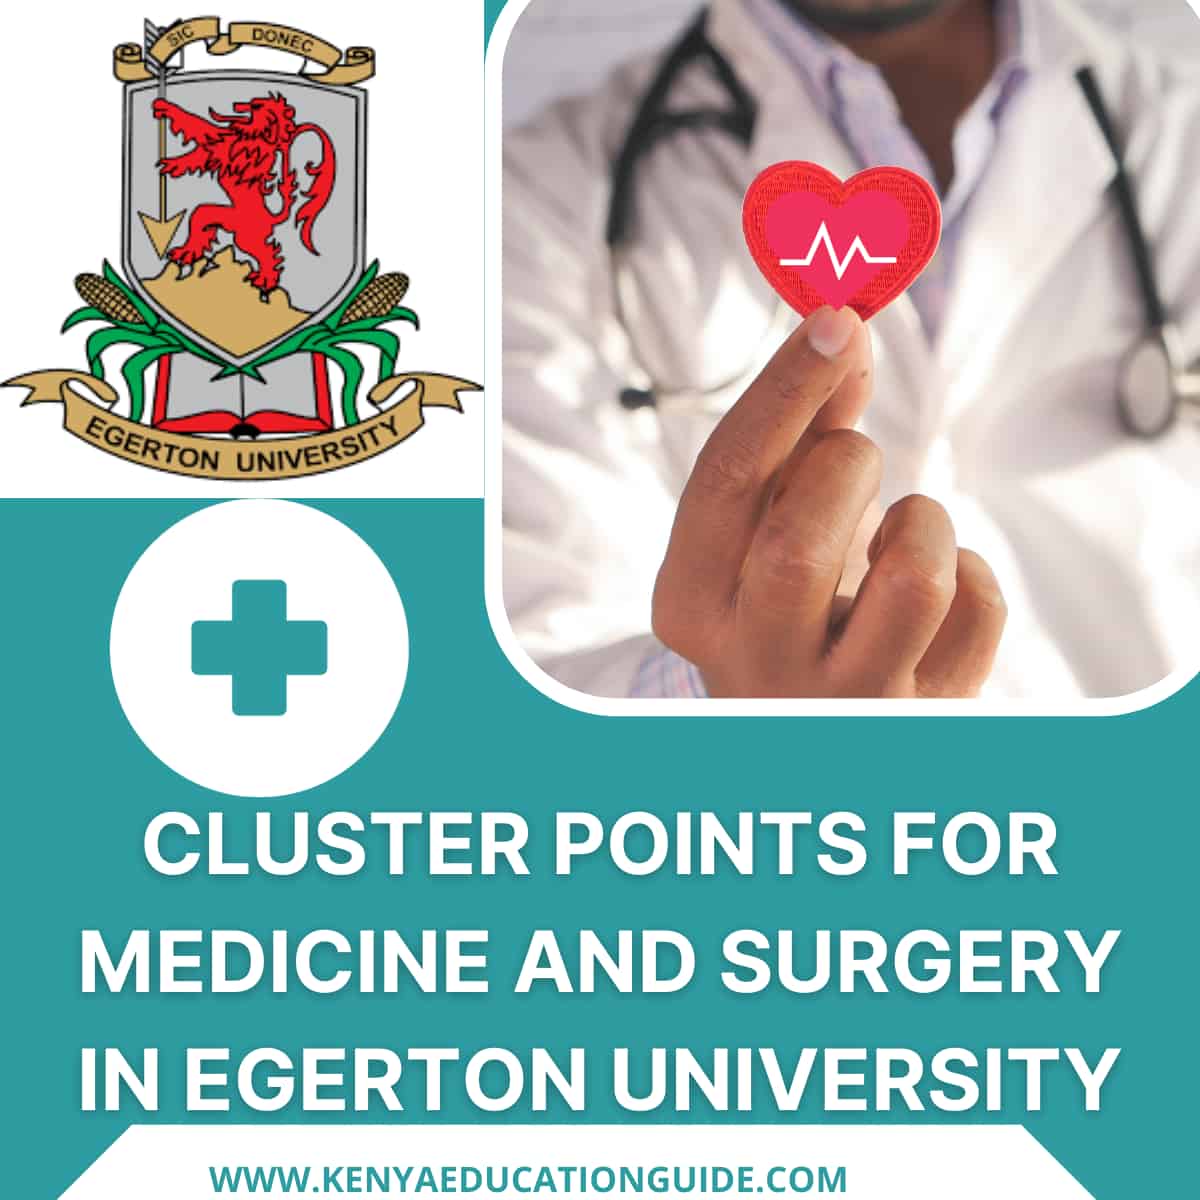 Cluster Points for Medicine and Surgery in Egerton University